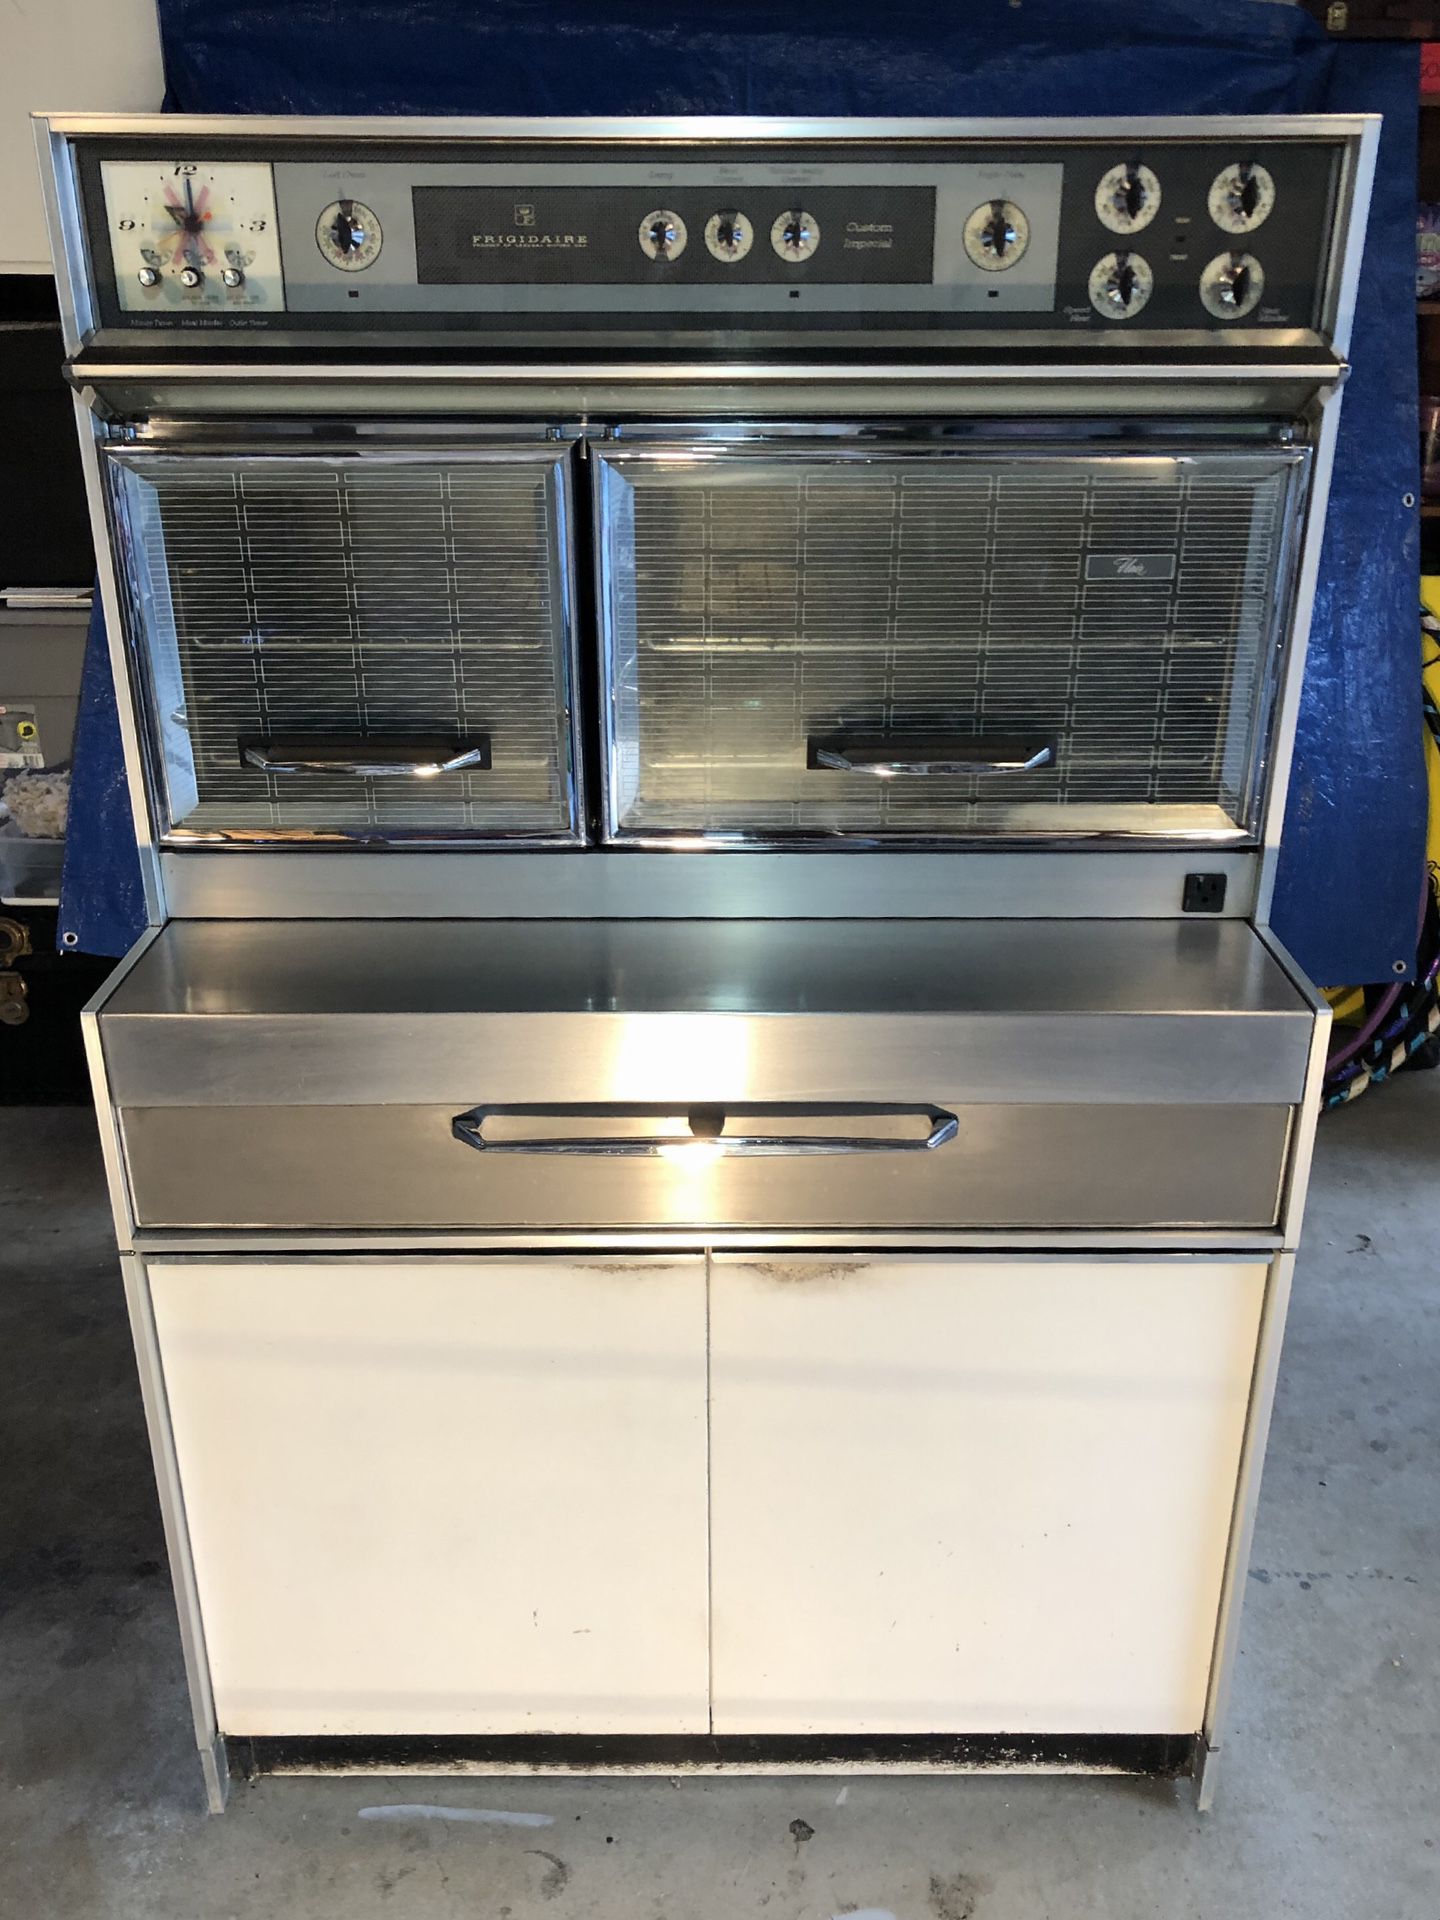 FRIGIDAIRE CUSTOM IMPERIAL Flair 40 inch range with hood, electric double  oven $399.00 - PicClick